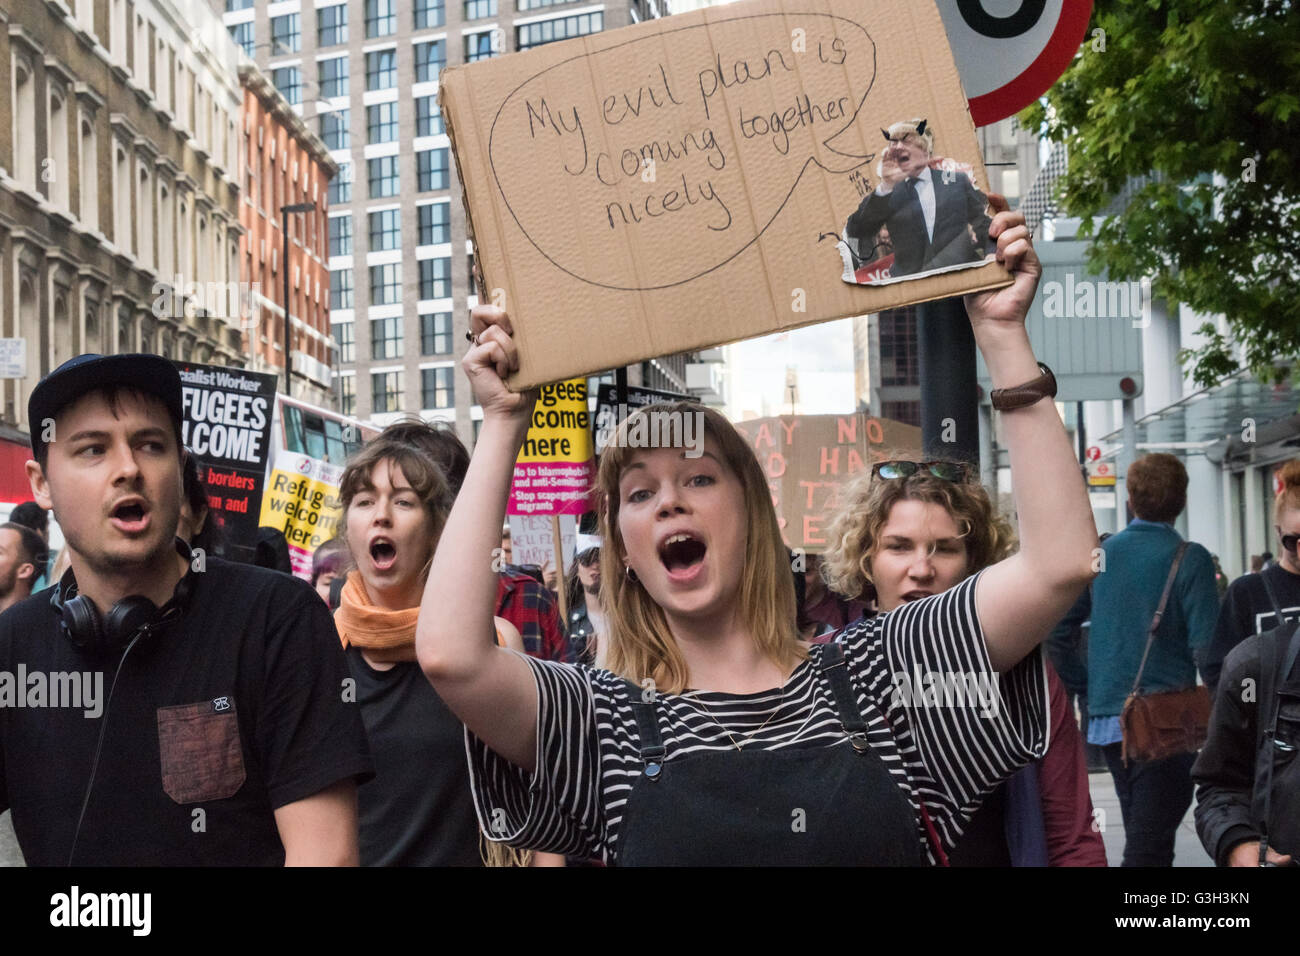 London, UK. June 24th 2016. Protesters, including a woman holding up a poster with Boris as a devil', march from the rally in Altab Ali Park to the offices of News International on the day after the UK voted to leave the EU. They were protesting against racism, for migrant rights and against fascist violence and argue that migration and immigrants have been attacked and scapegoated not only by both Remain and Leave campaigns but by mainstream parties and media over more than 20 years, stoking up hatred by insisting immigrants are a 'problem'. Peter Marshall/Alamy Live News Stock Photo